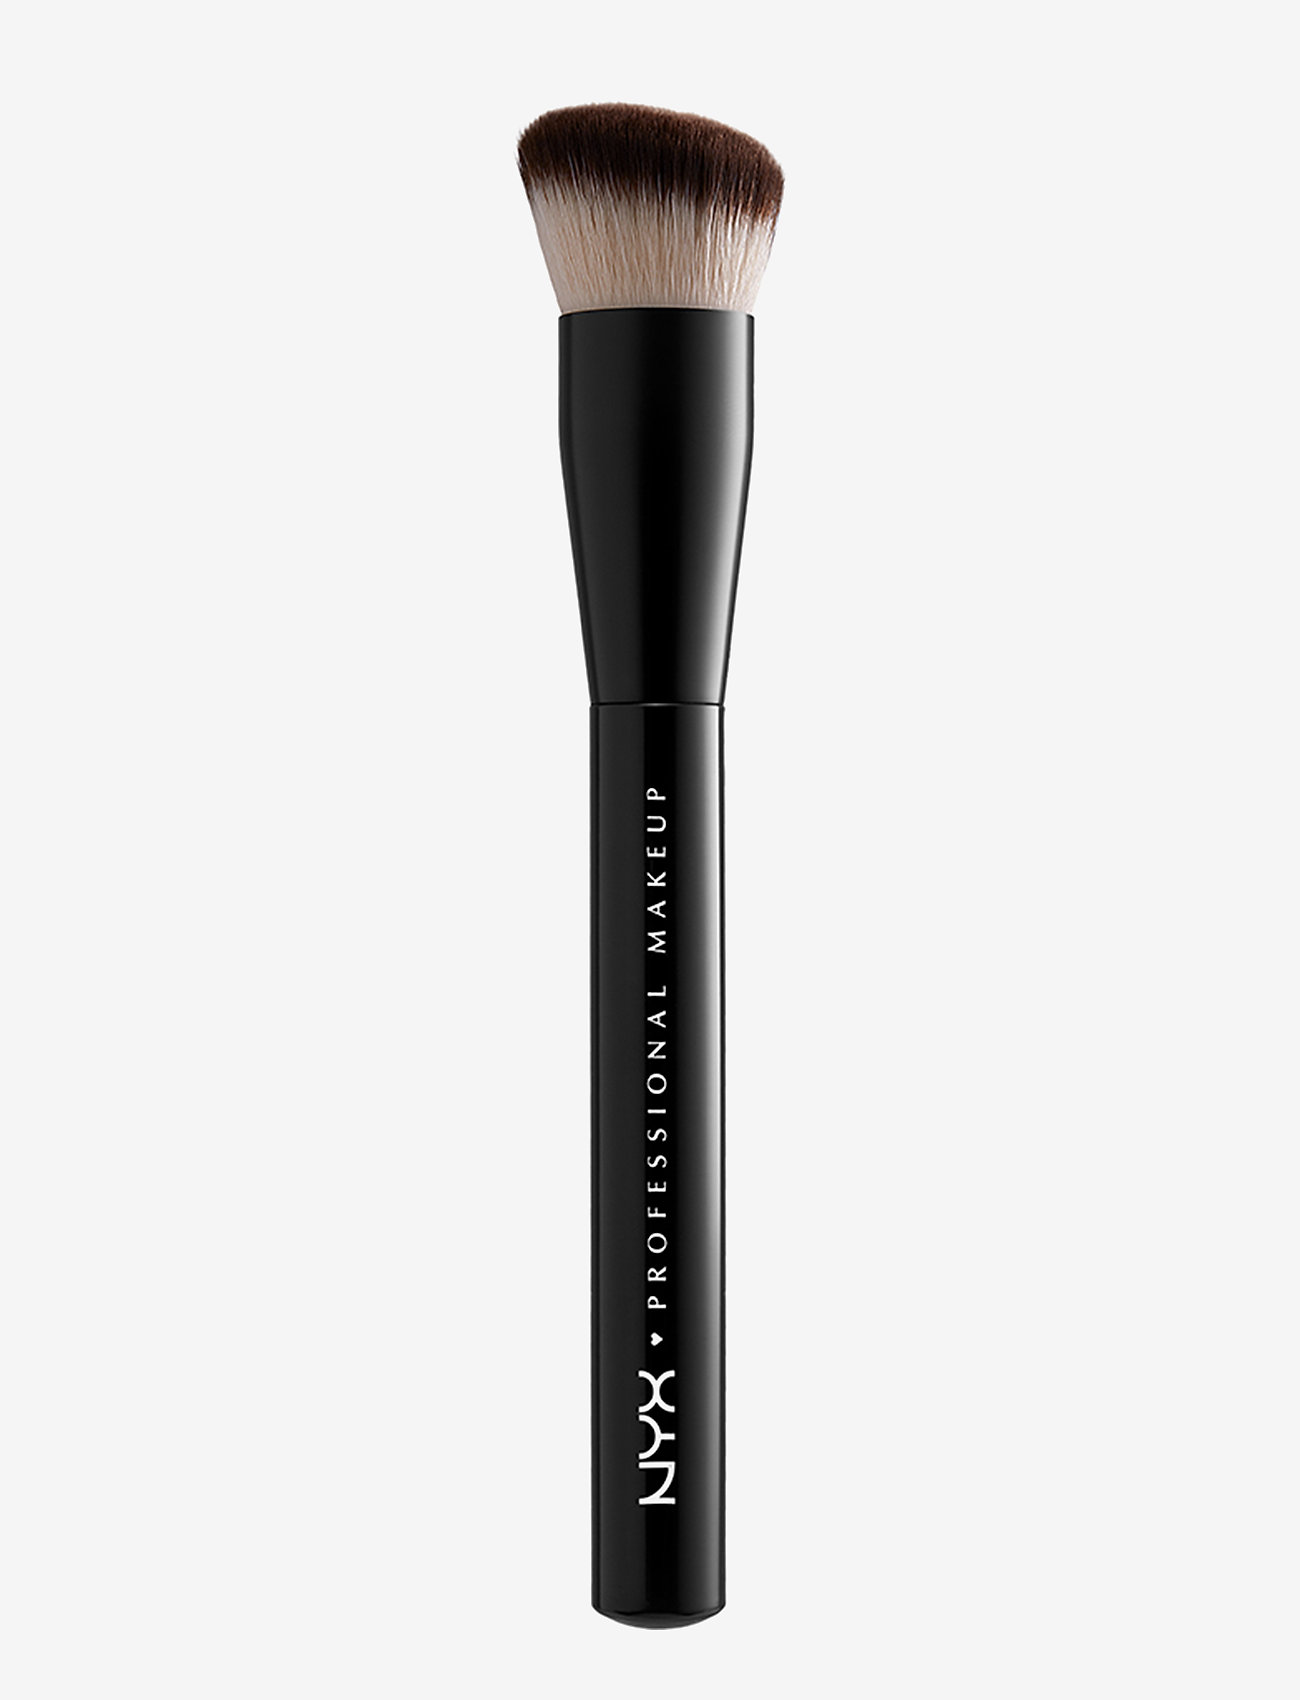 NYX PROFESSIONAL MAKEUP - CAN'T STOP WON'T STOP FOUNDATION BRUSH - no color - 0